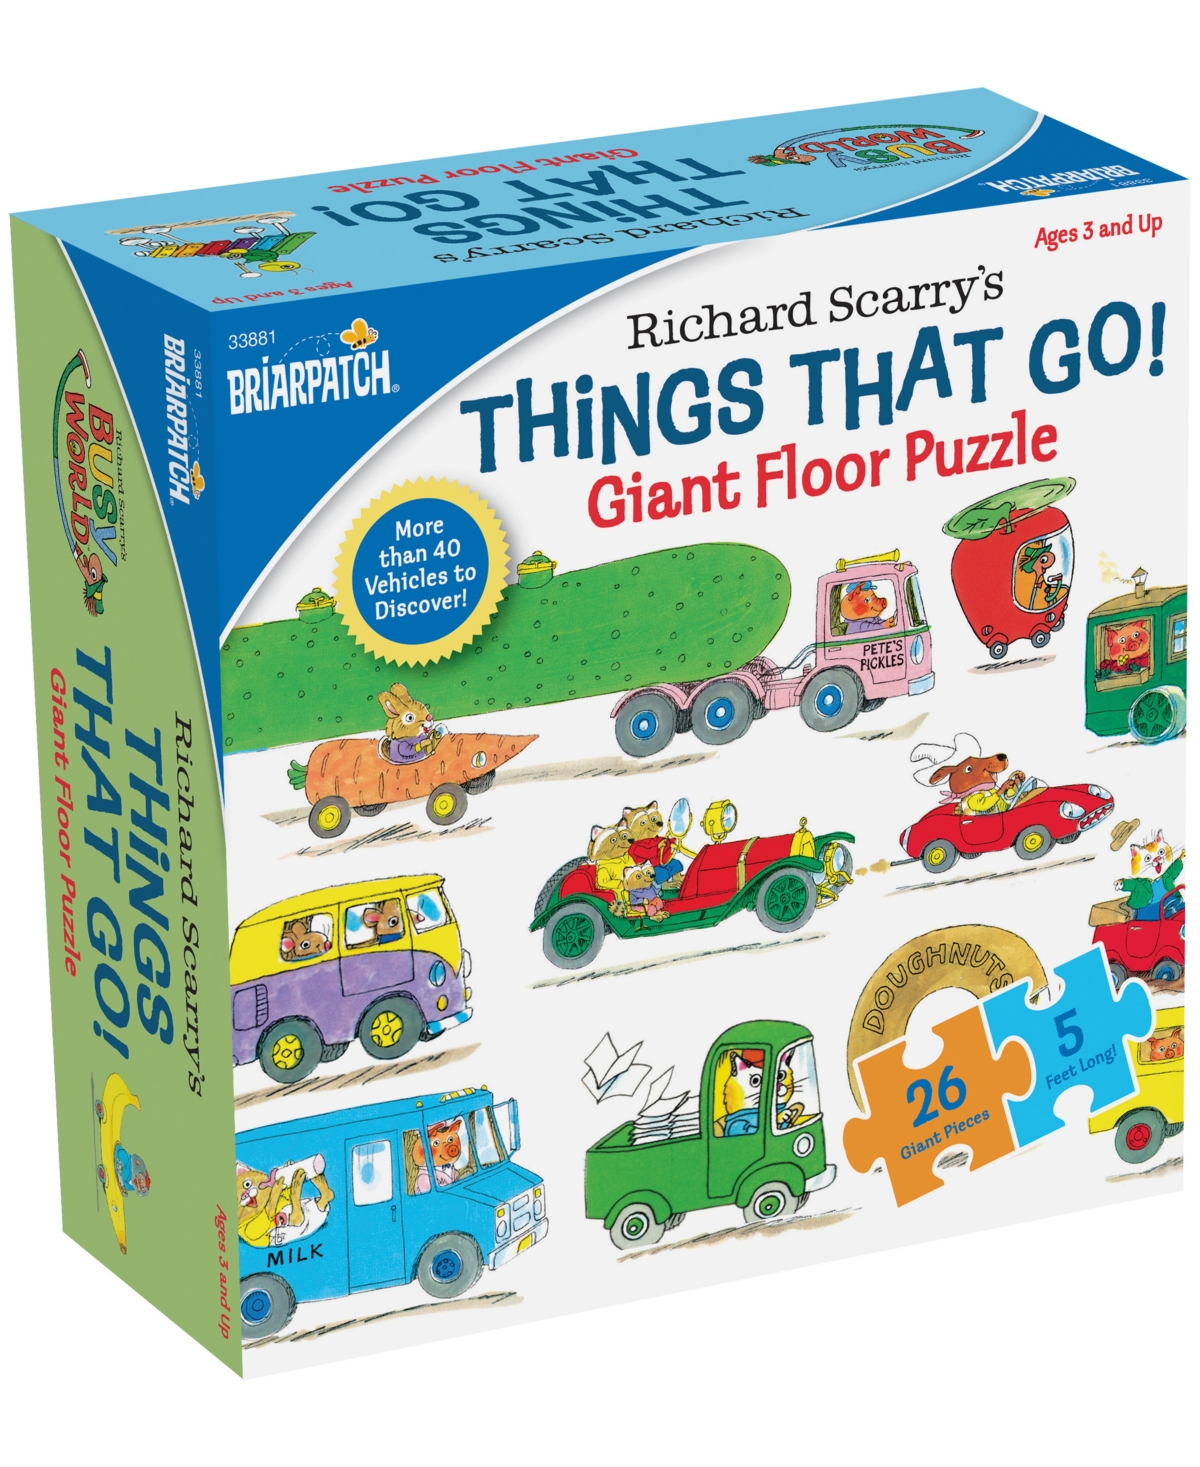 University Games Babies' Briarpatch Richard Scarry's Things That Go Giant Floor Puzzle, 26 Pieces In No Color